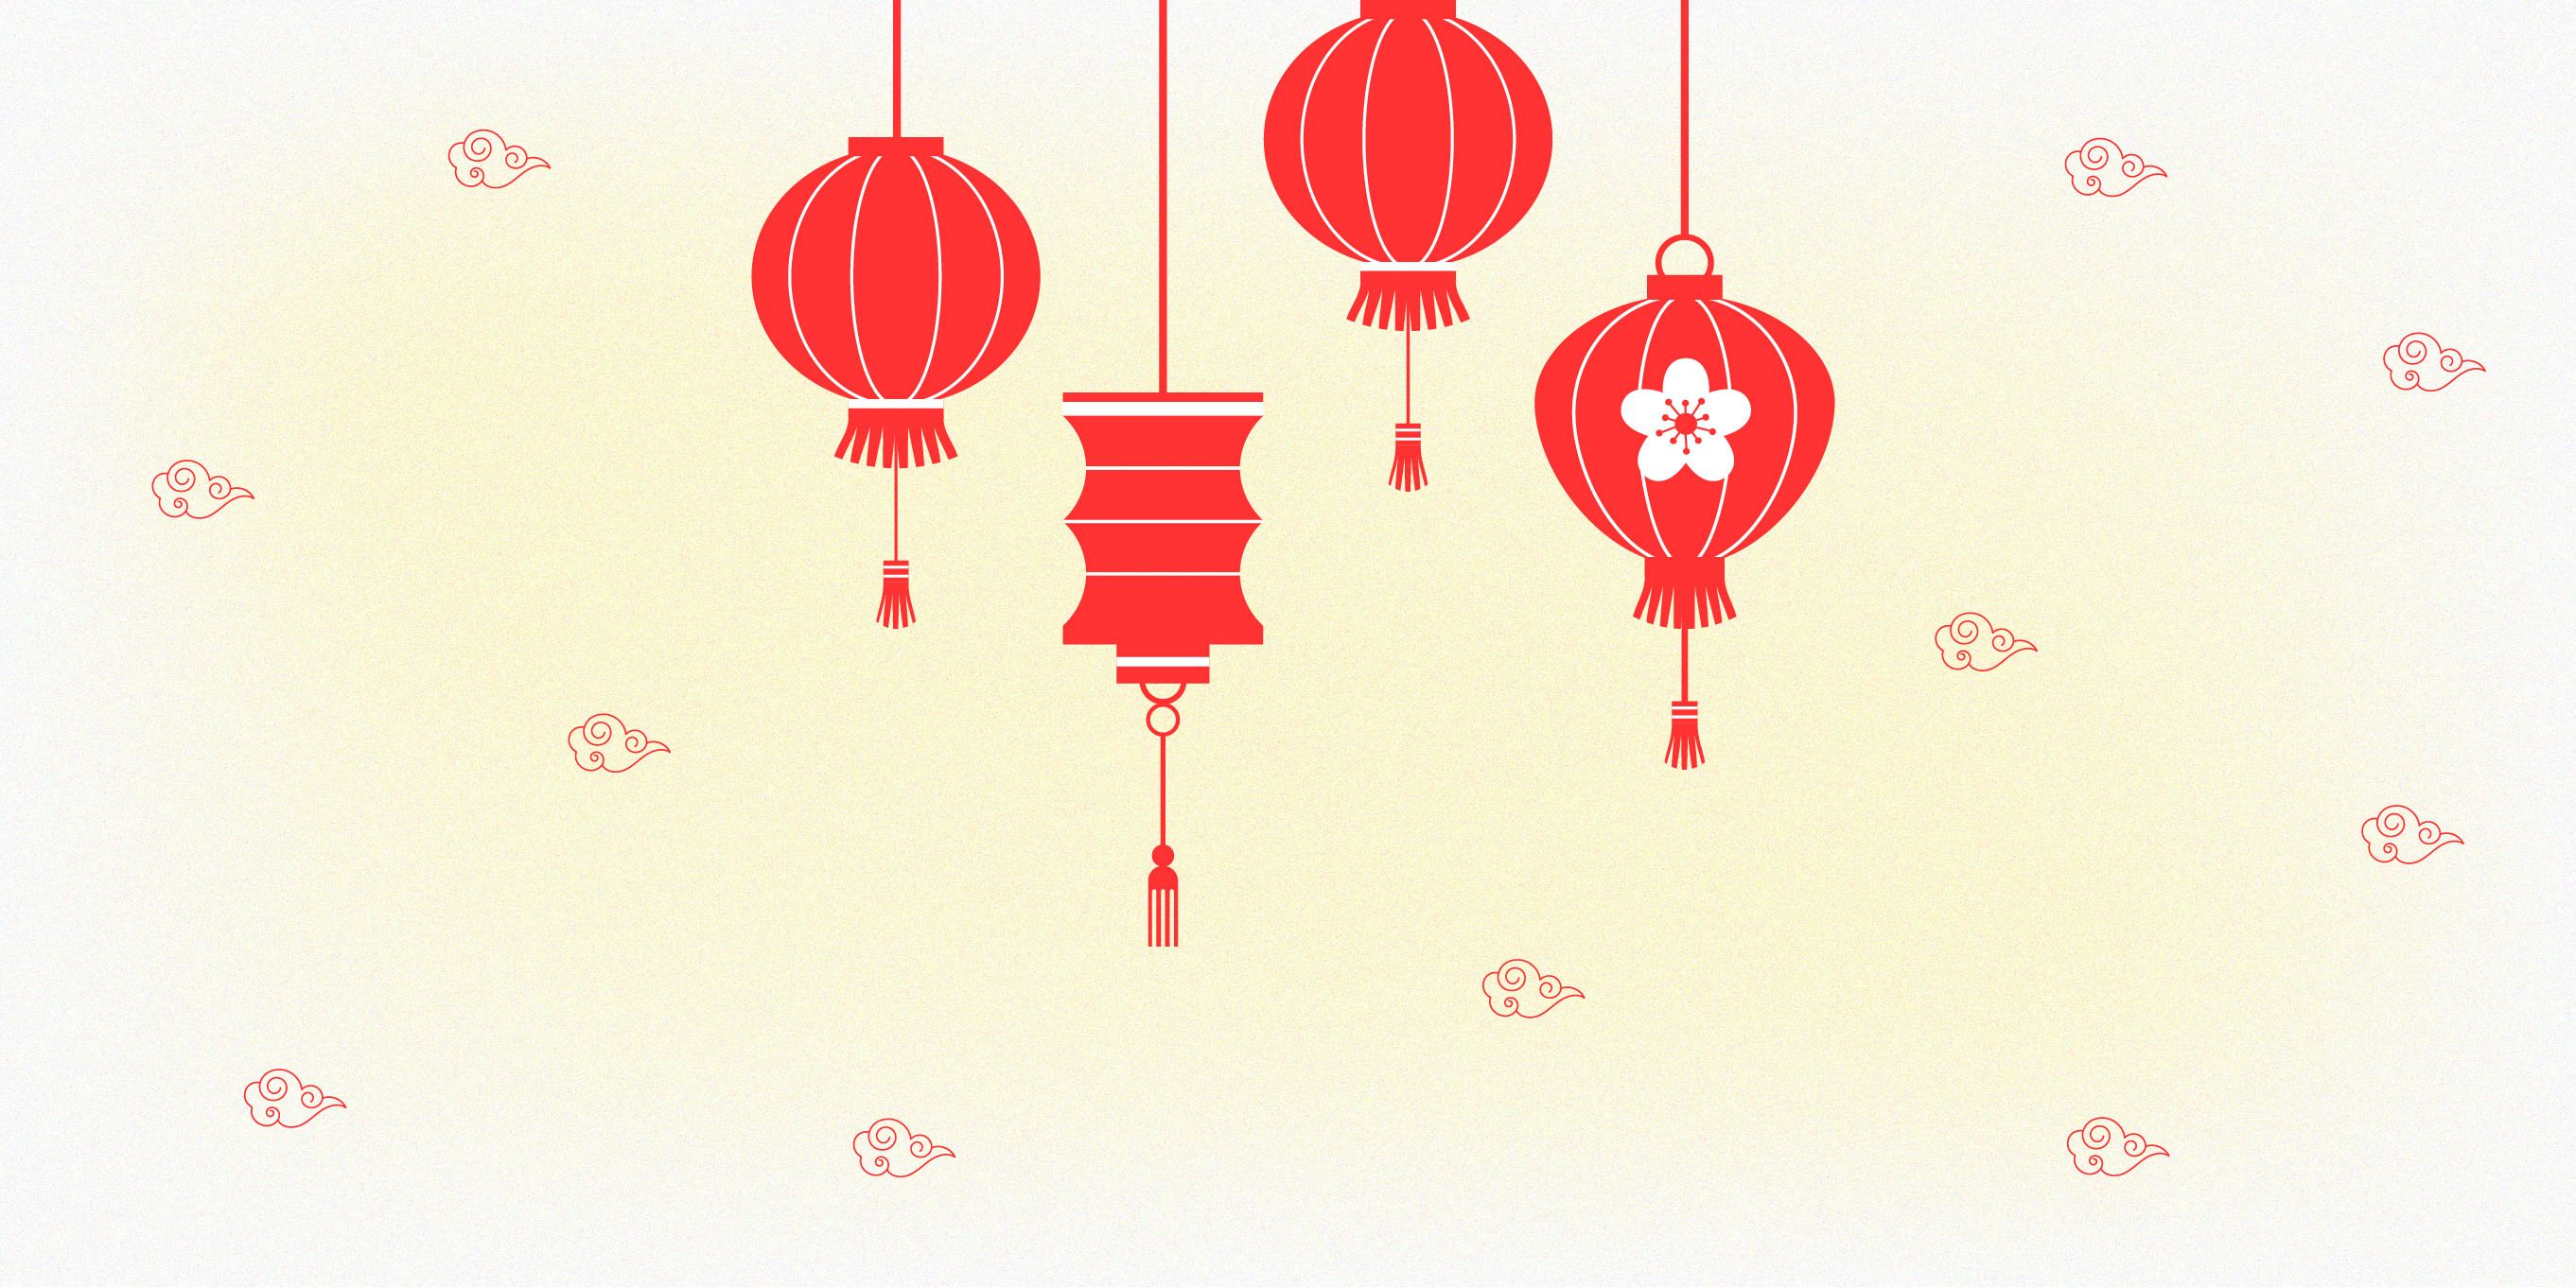 70 Chinese New Year Wishes and Lunar New Year Greetings for 2023